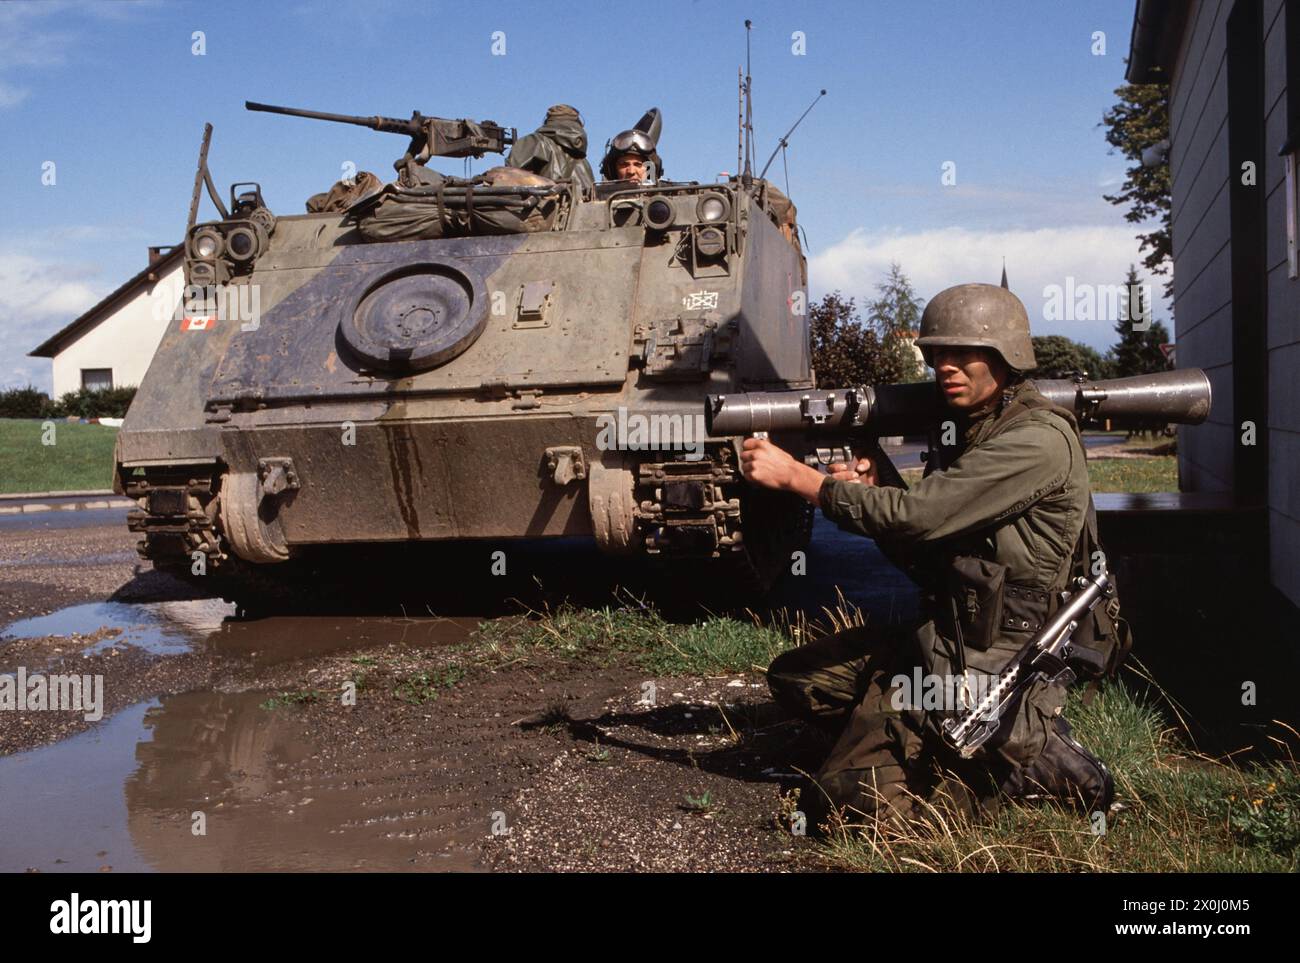 - NATO Exercises in Germany, Canadian troops (October 1984)   - Esercitazioni NATO in Germania, truppe Canadesi (Ottobre 1984) Stock Photo